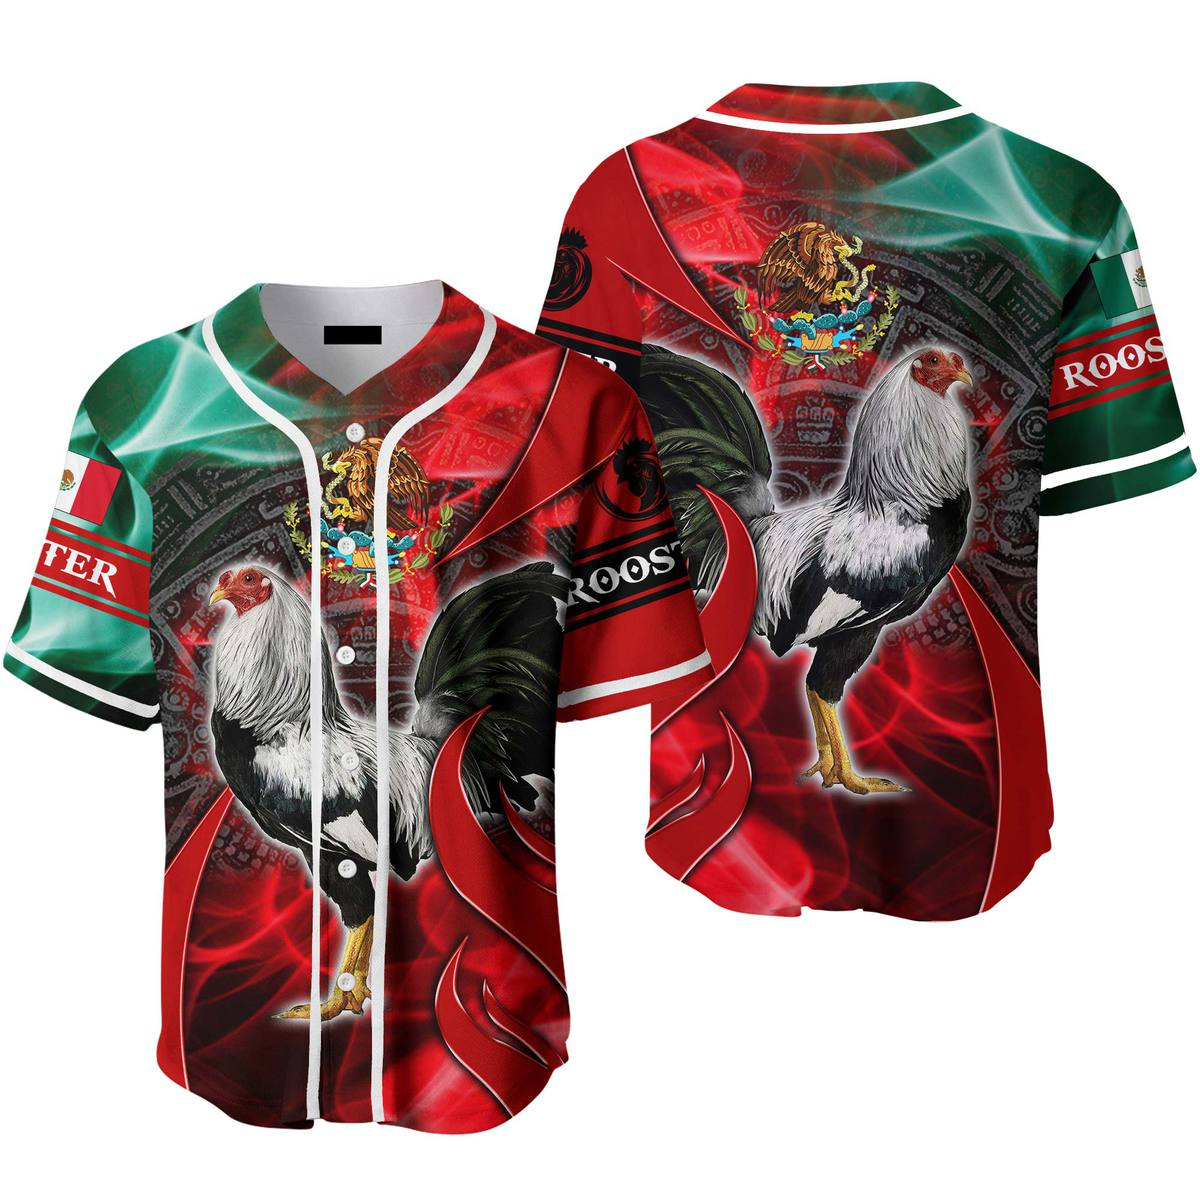 Rooster Mexico - Gift For Mexicans/ Mexico Lovers - Red And Green Baseball Jerseys For Men & Women